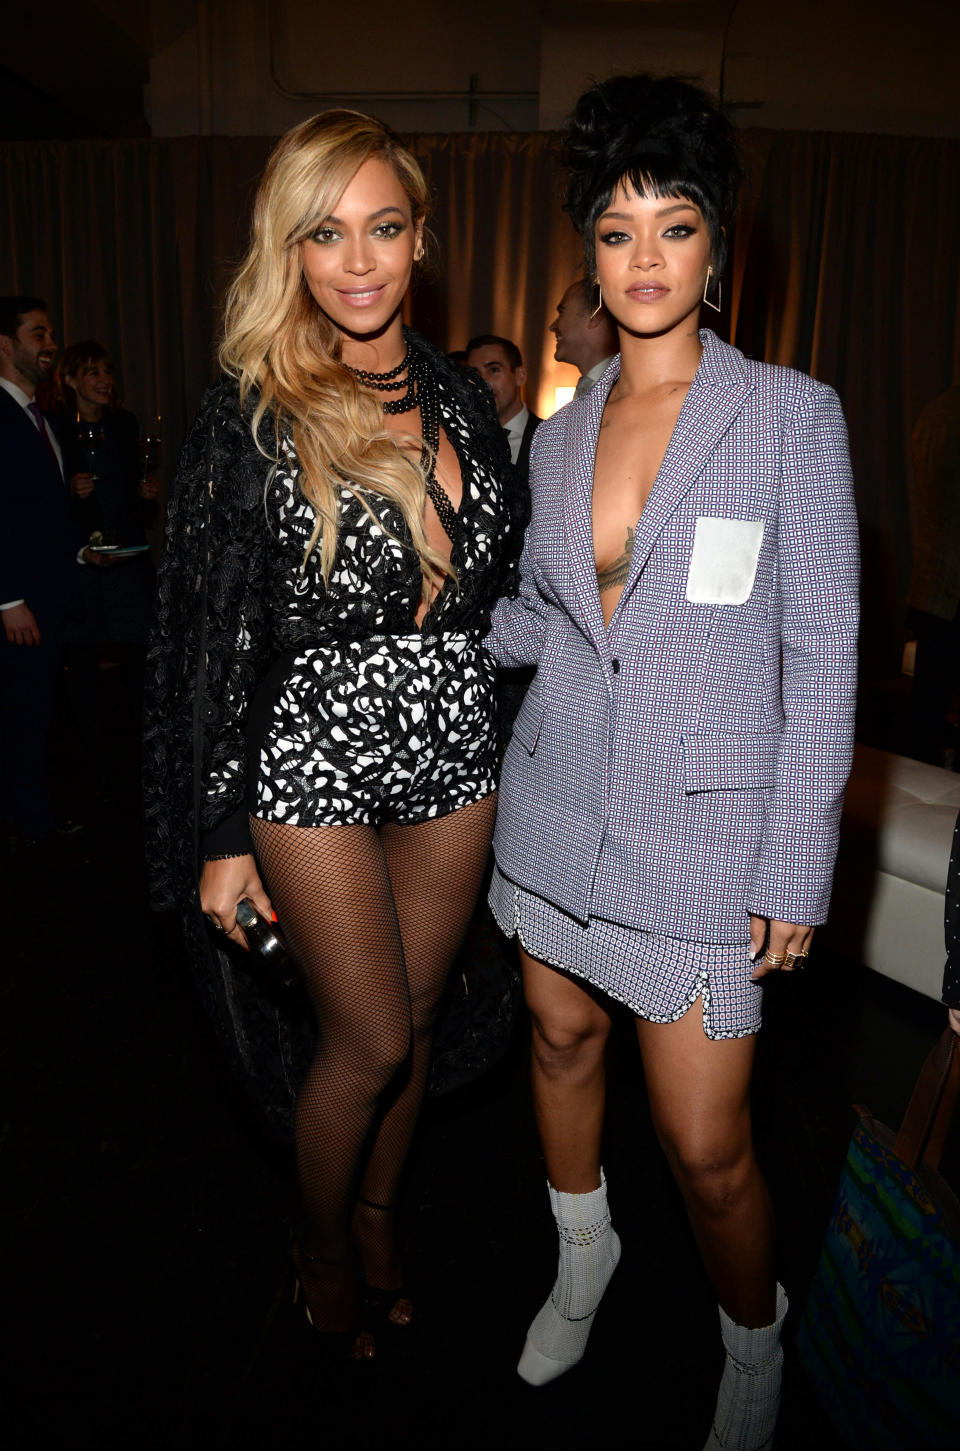 NEW YORK, NY – MARCH 30: (Exclusive Coverage) Beyonce and Rihanna attend the Tidal launch event #TIDALforALL at Skylight at Moynihan Station on March 30, 2015 in New York City. (Photo by Kevin Mazur/Getty Images For Roc Nation)